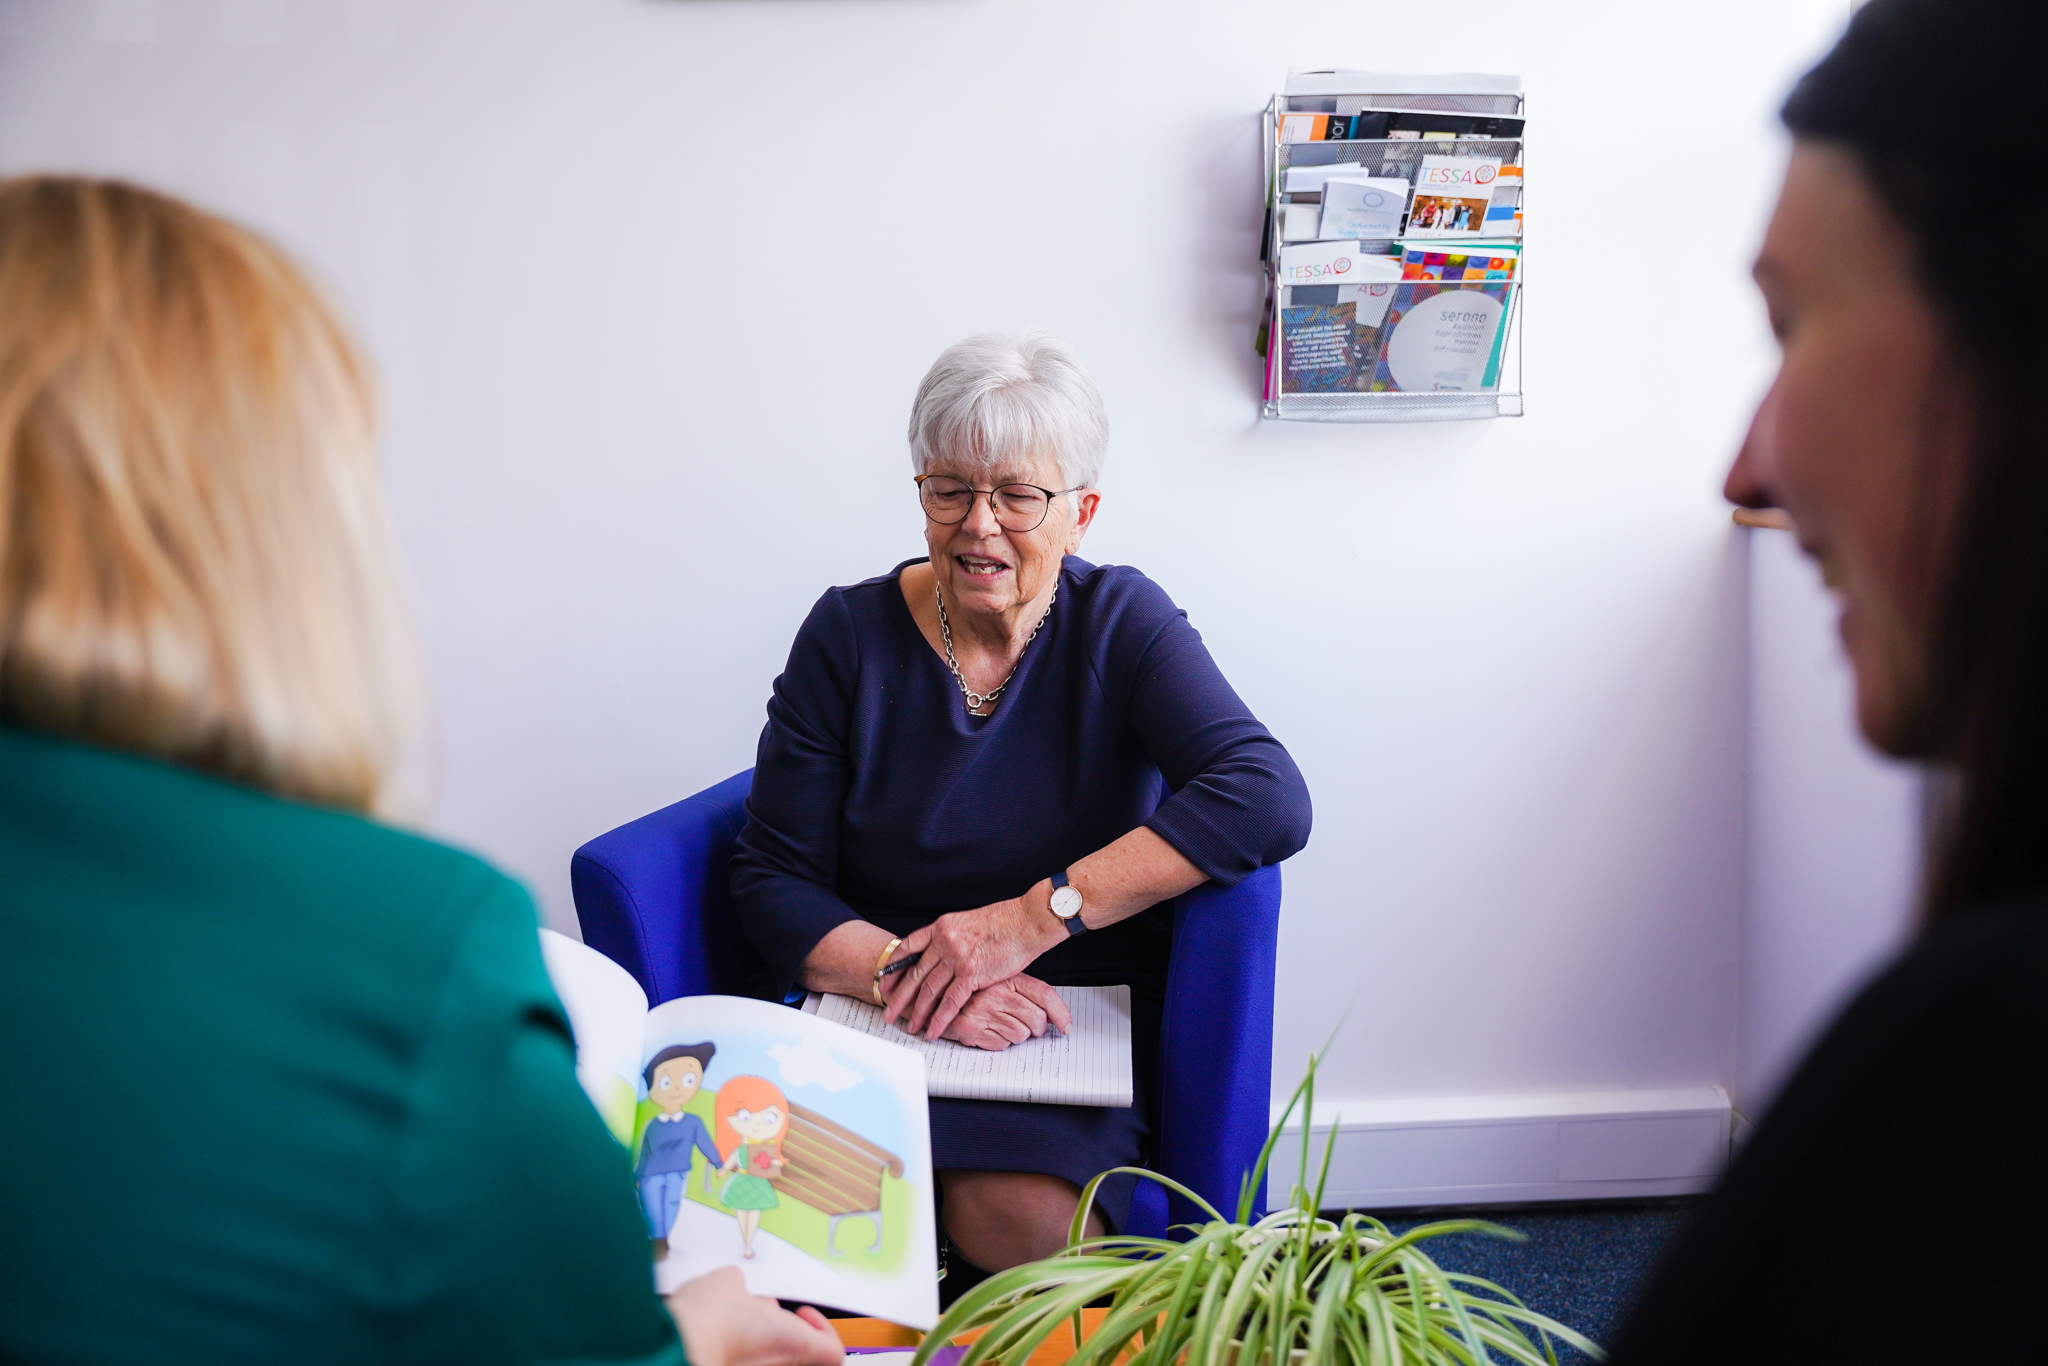 Barbara in action counselling